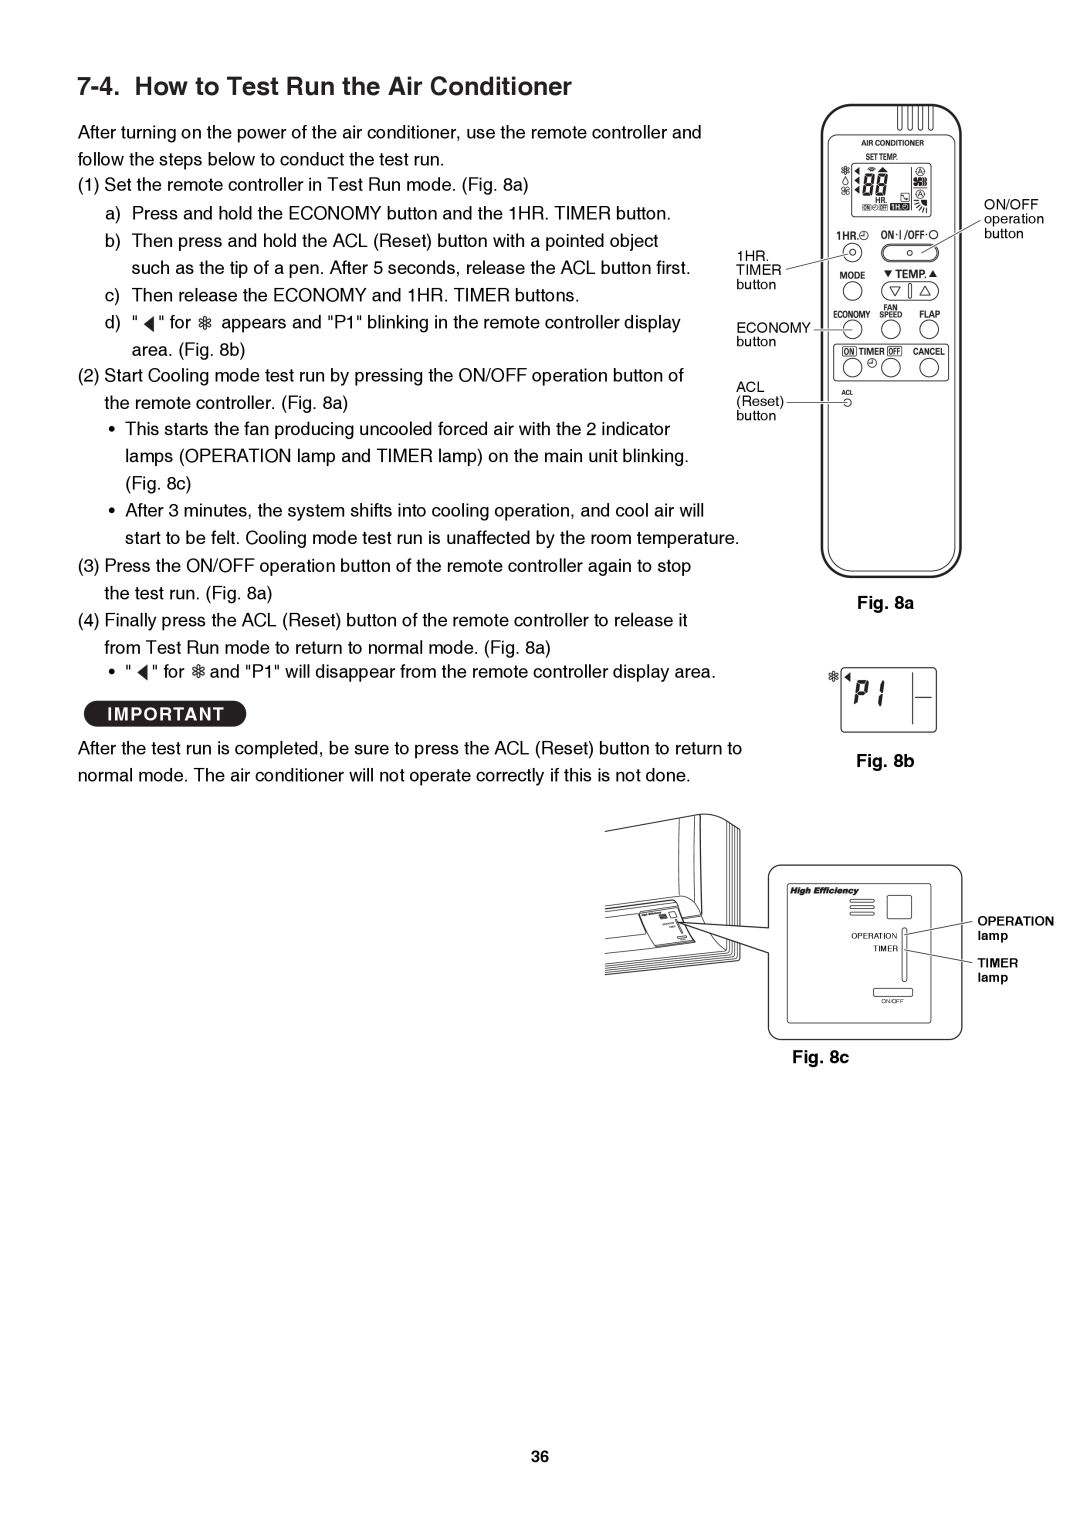 Sanyo SAP-K77RAX, Sanyo Split System Air Conditoner service manual How to Test Run the Air Conditioner, a b 